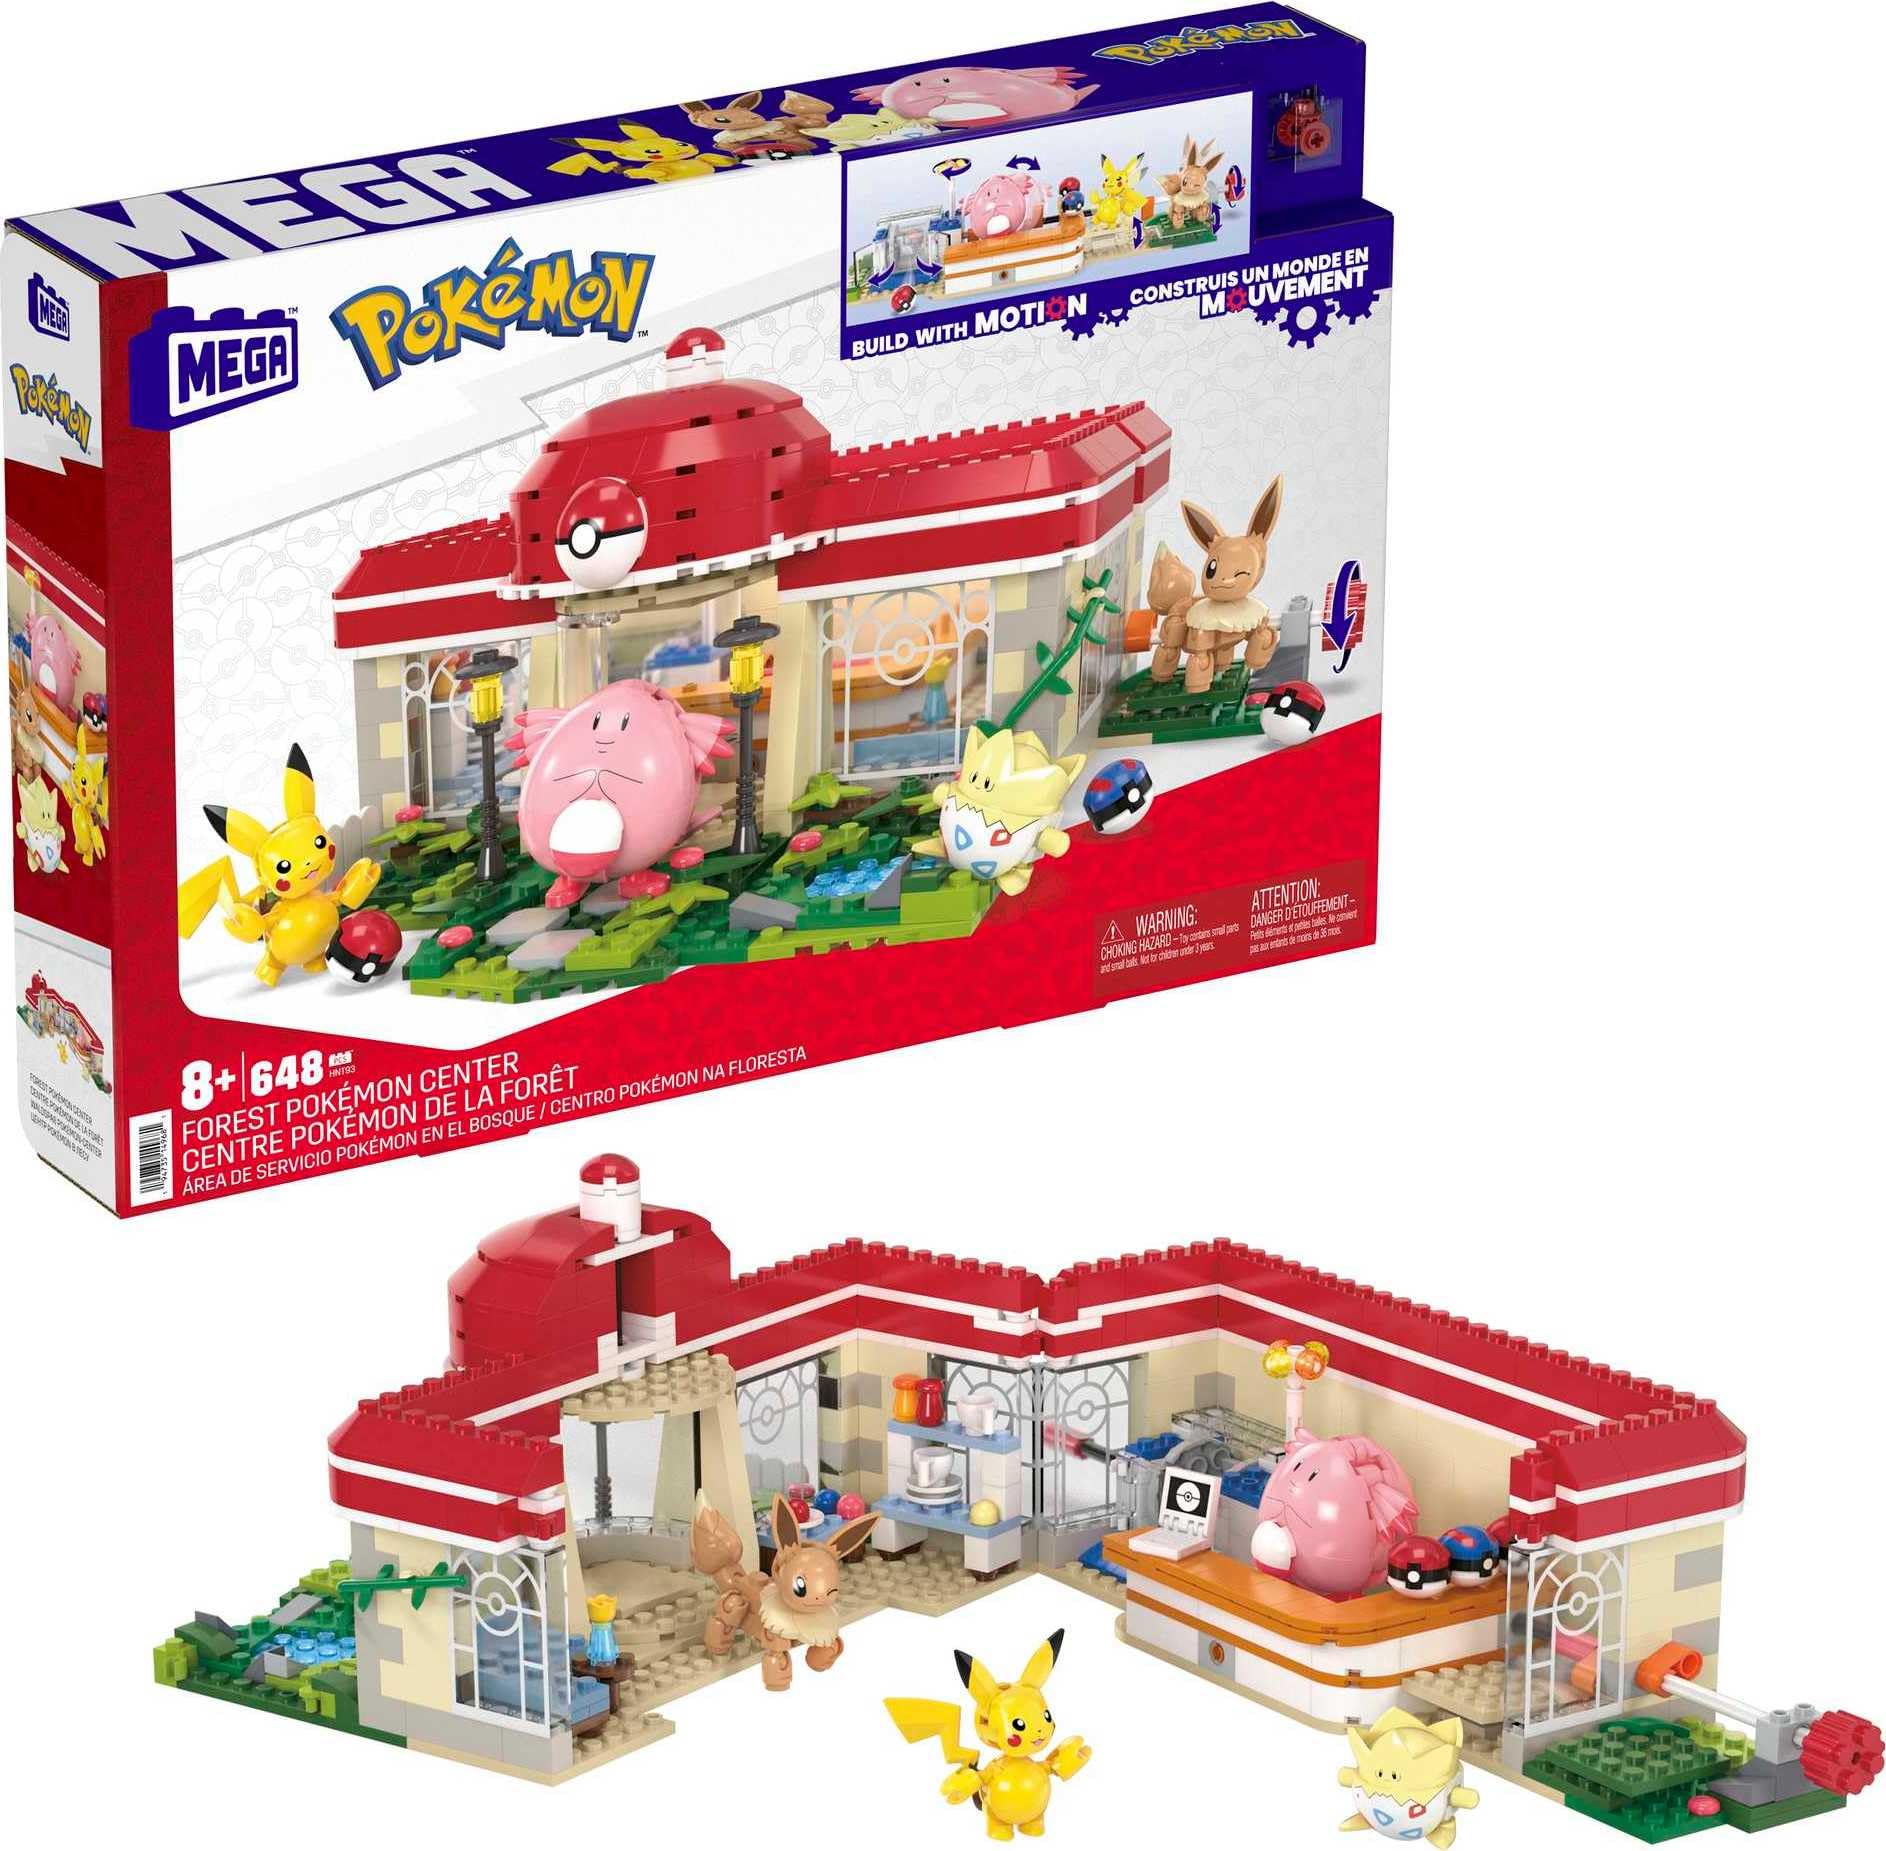 648-Piece MEGA Pokémon Action Figure Forest Pokémon Center w/ 4 Poseable Characters $29 + Free Shipping w/ Prime or on $35+